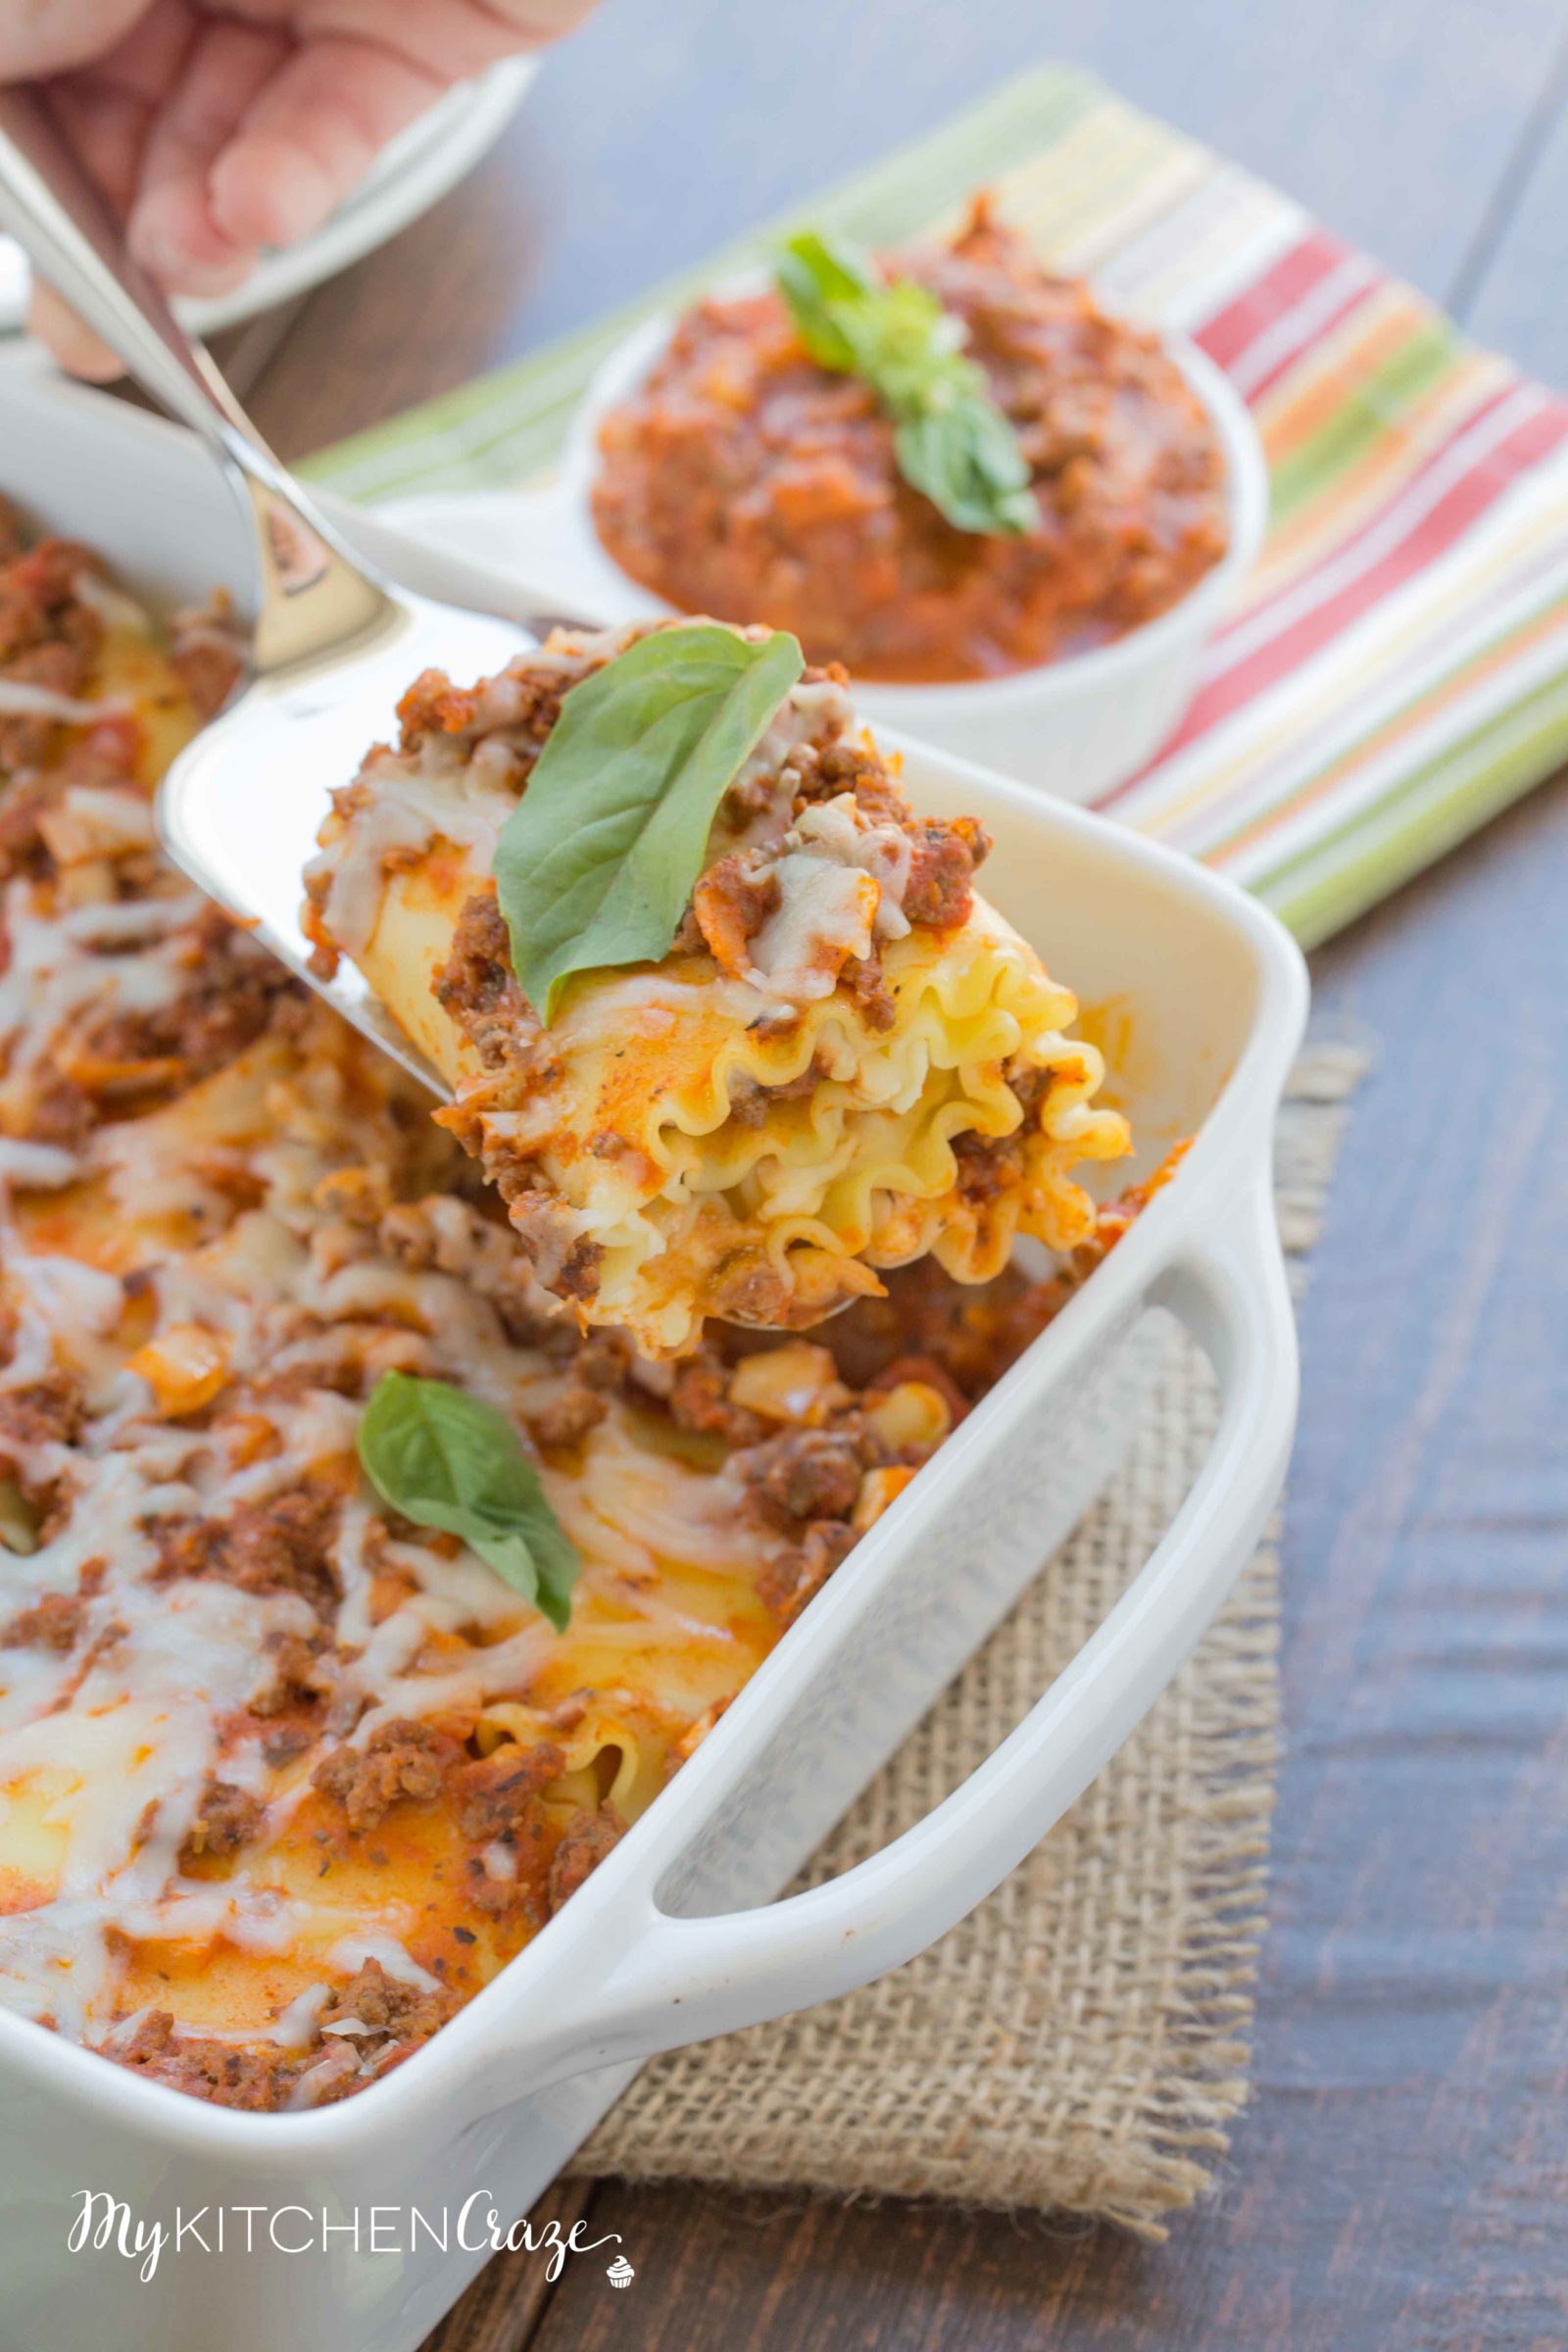 Lasagna Roll-Ups ~ mykitchencraze.com ~ A fun twist and easy way to make lasagna. These roll-ups are filled with everything you'd put in your lasagna, but better. The family will love them!